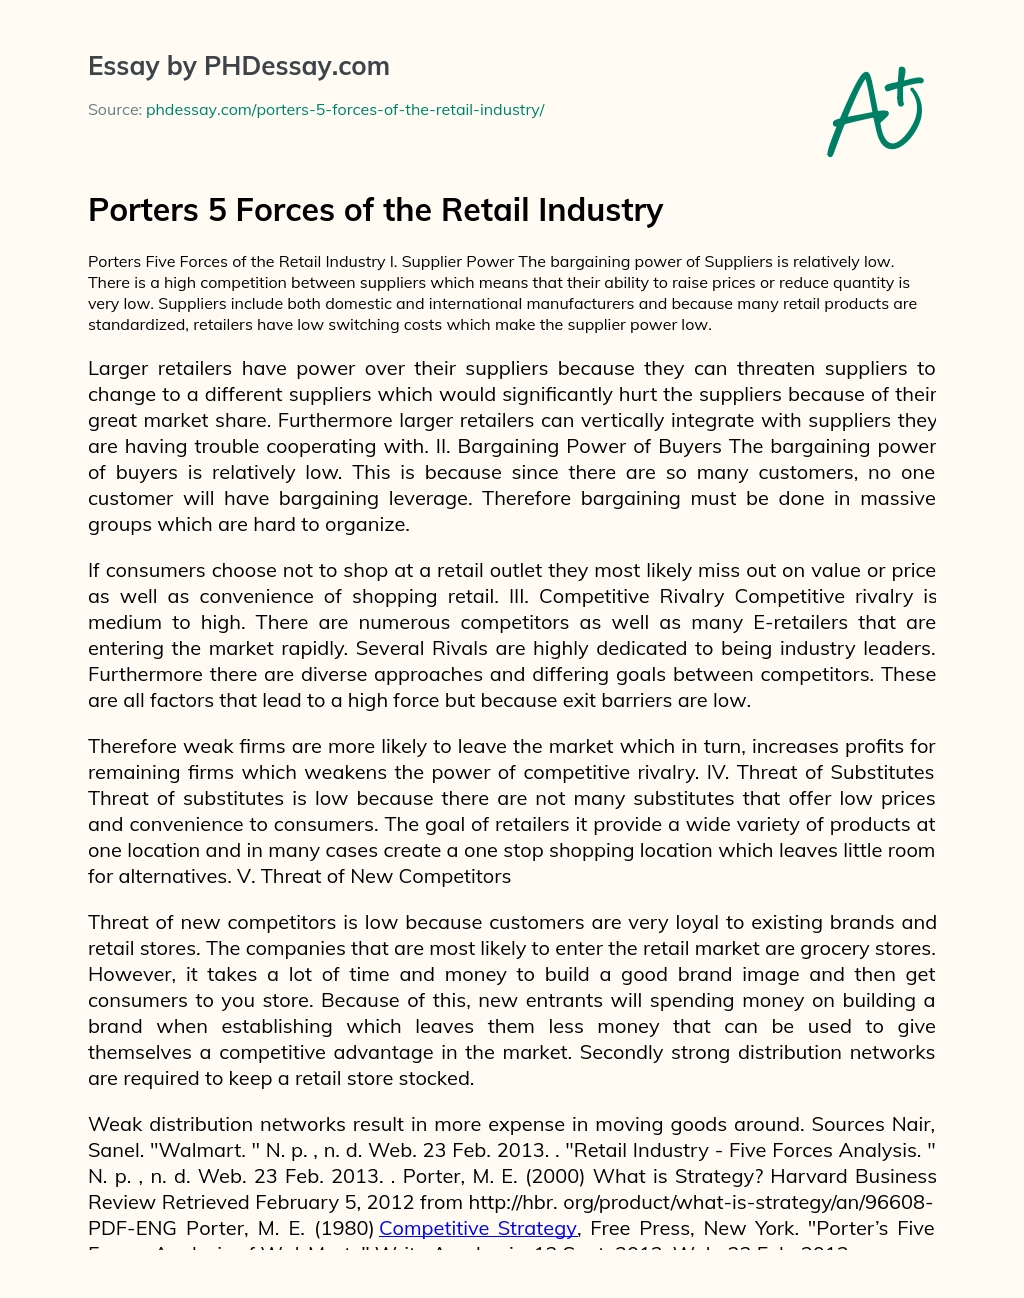 Porters 5 Forces of the Retail Industry essay